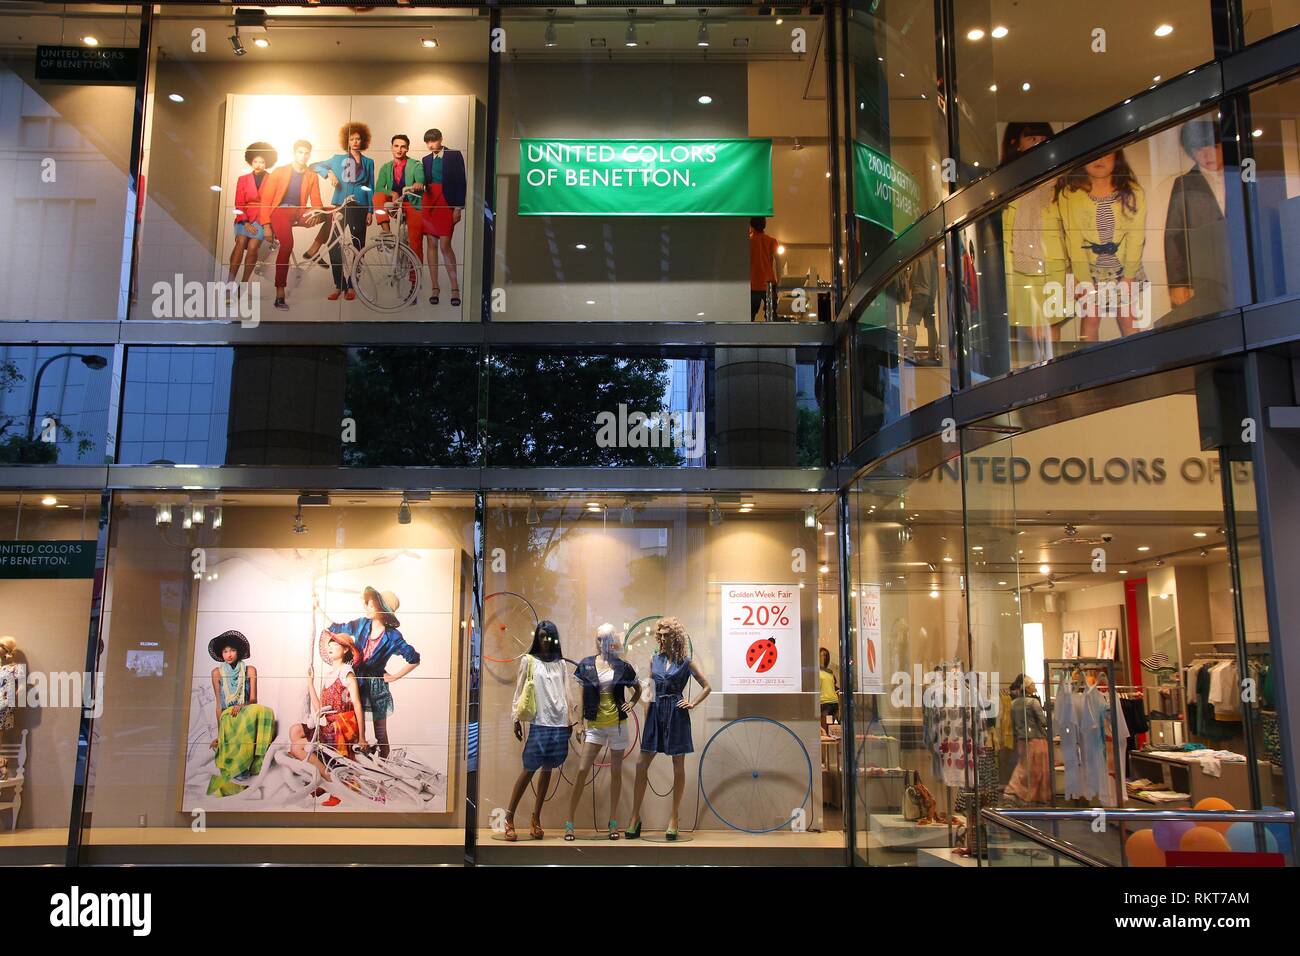 NAGOYA, JAPAN - MAY 3: People visit United Colors of Benetton fashion store  on May 3, 2012 in Nagoya, Japan. Benetton is a global luxury fashion brand  Stock Photo - Alamy